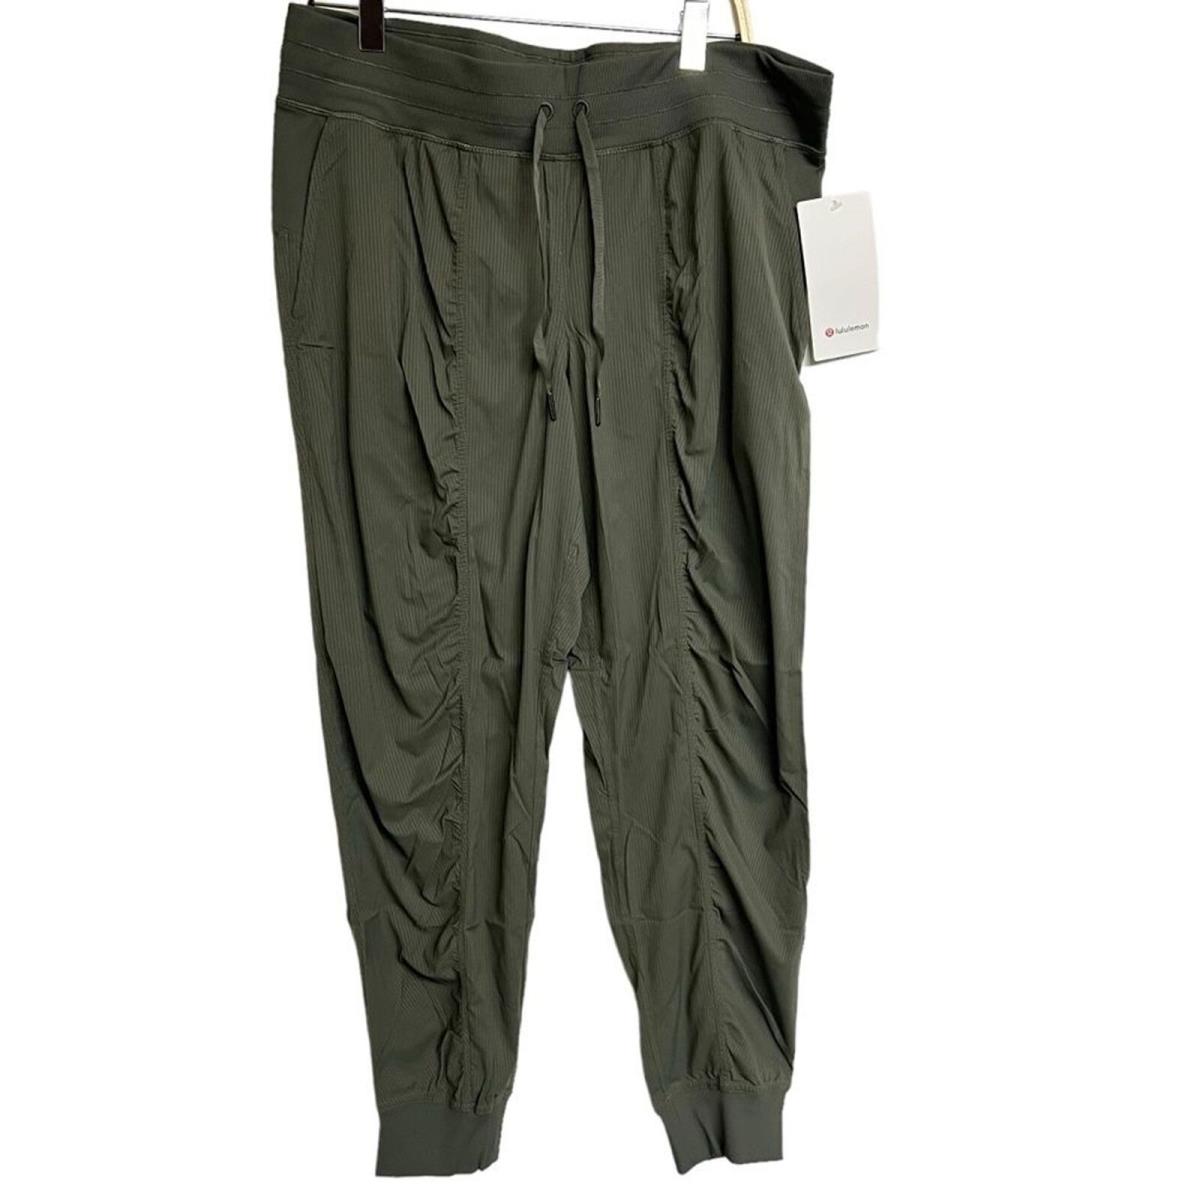 Lululemon Dance Studio Mid Rise Joggers in Army Green